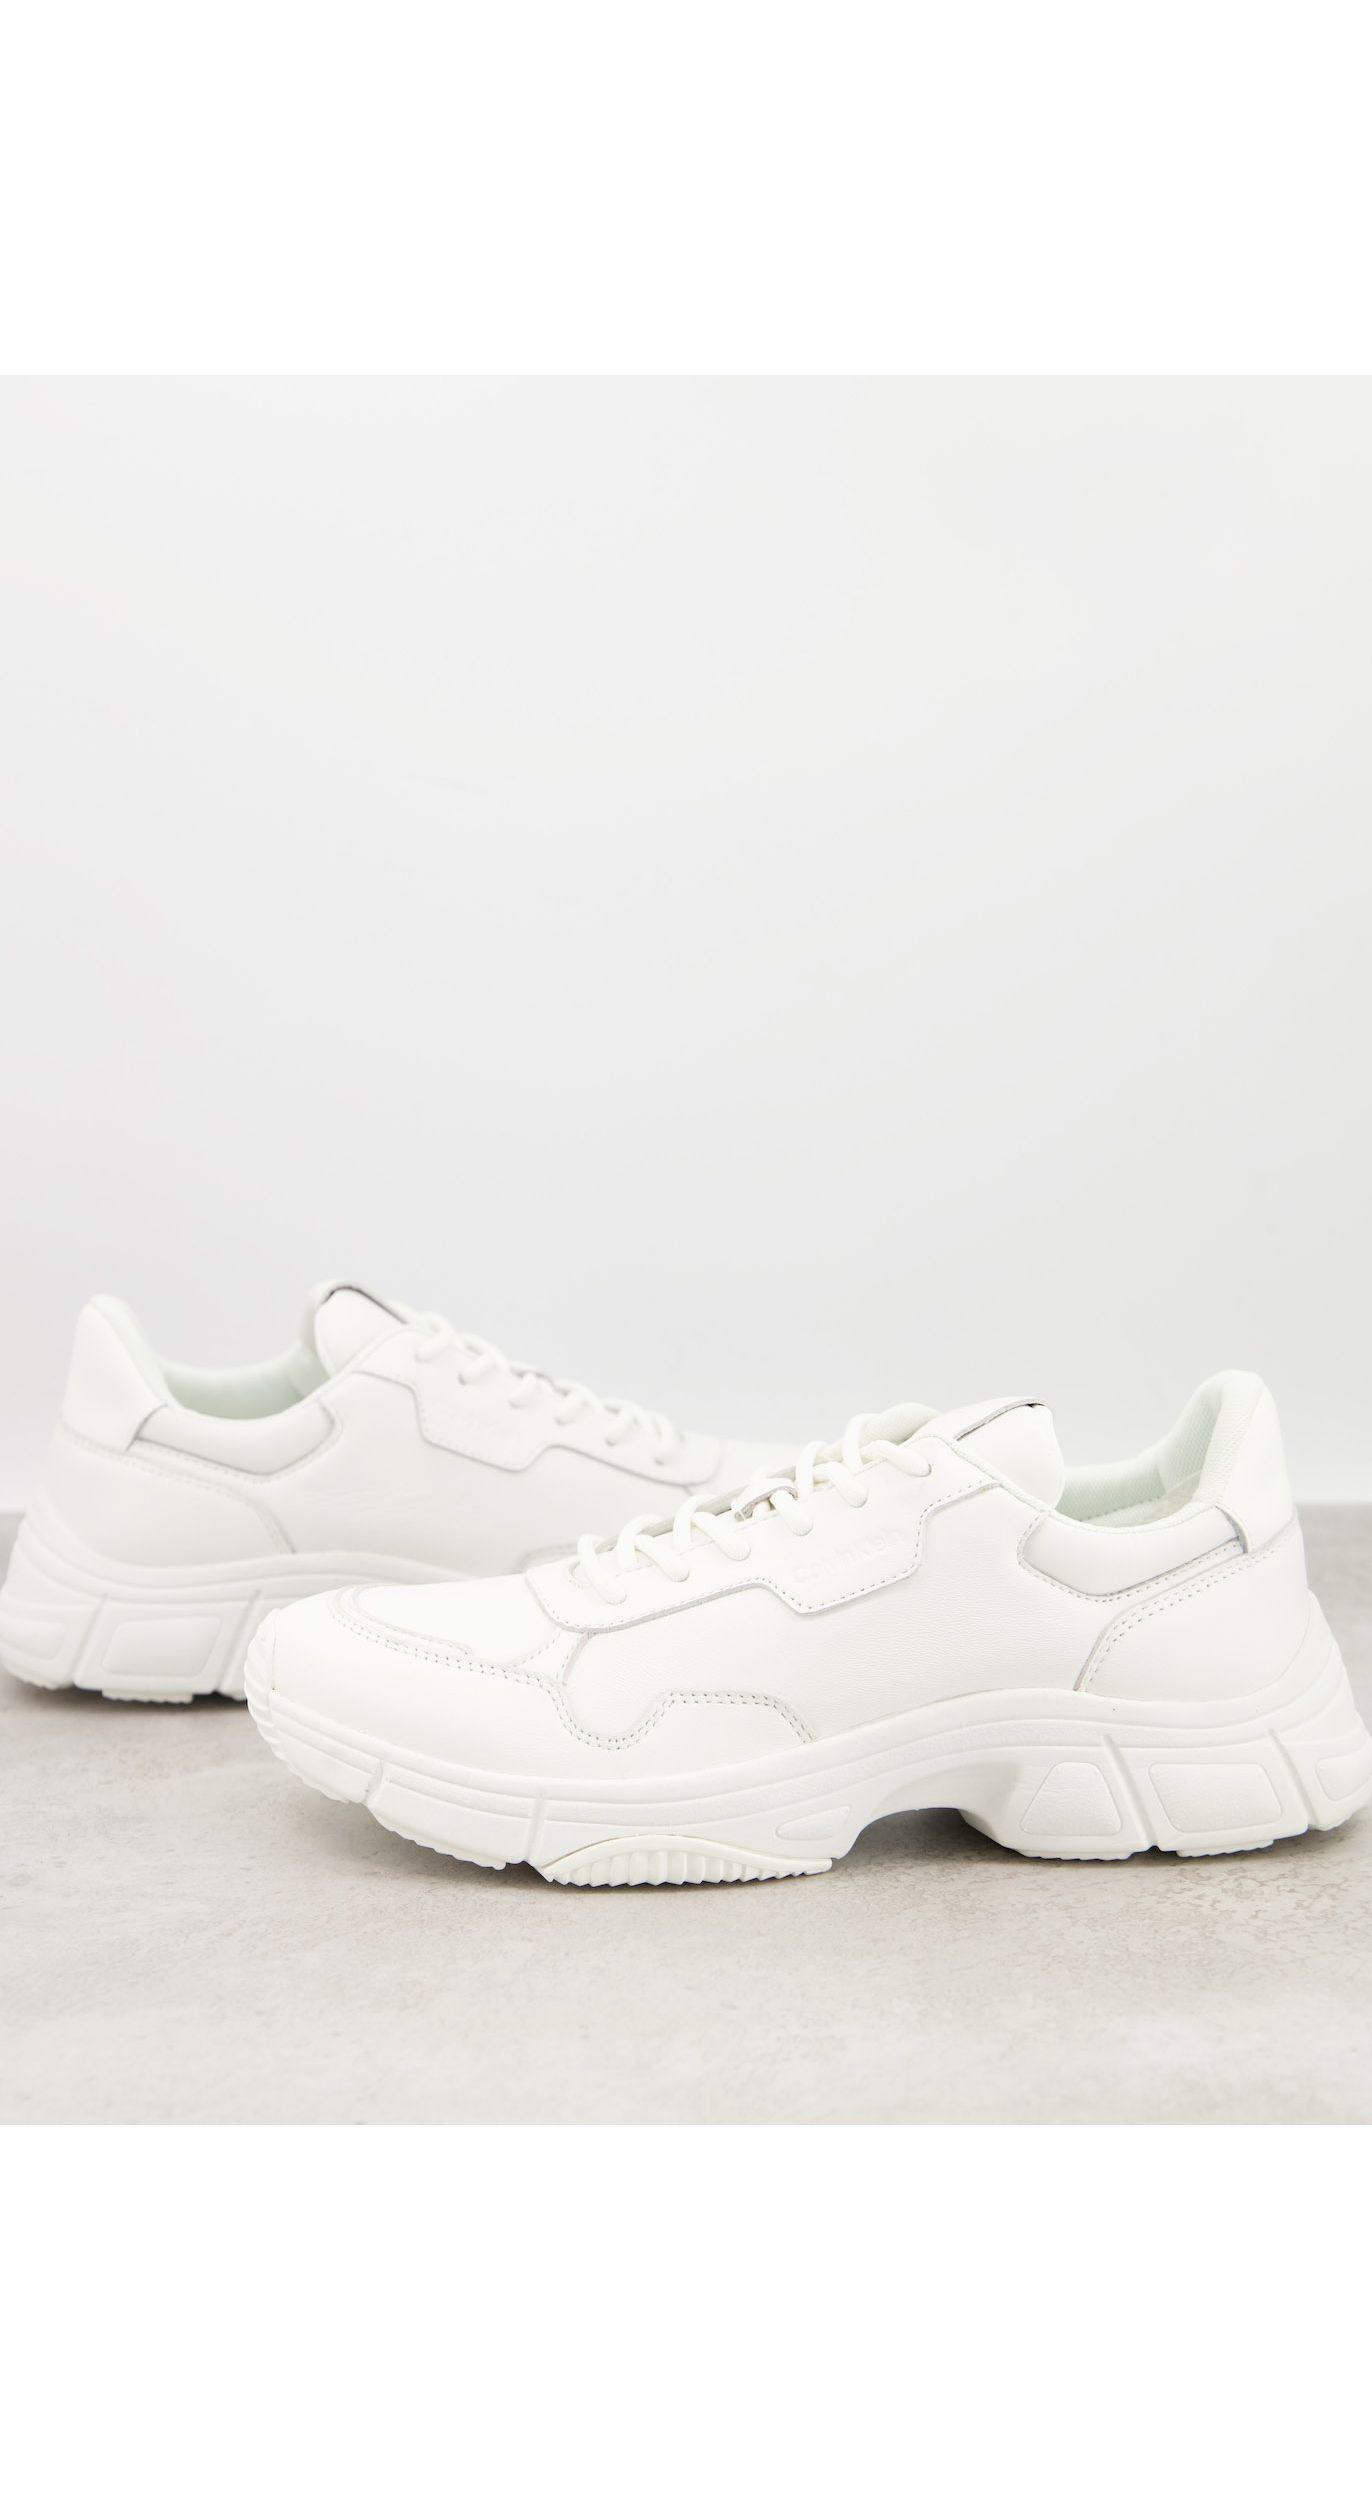 Calvin Klein Rubber Demos Chunky Trainers in White for Men - Lyst